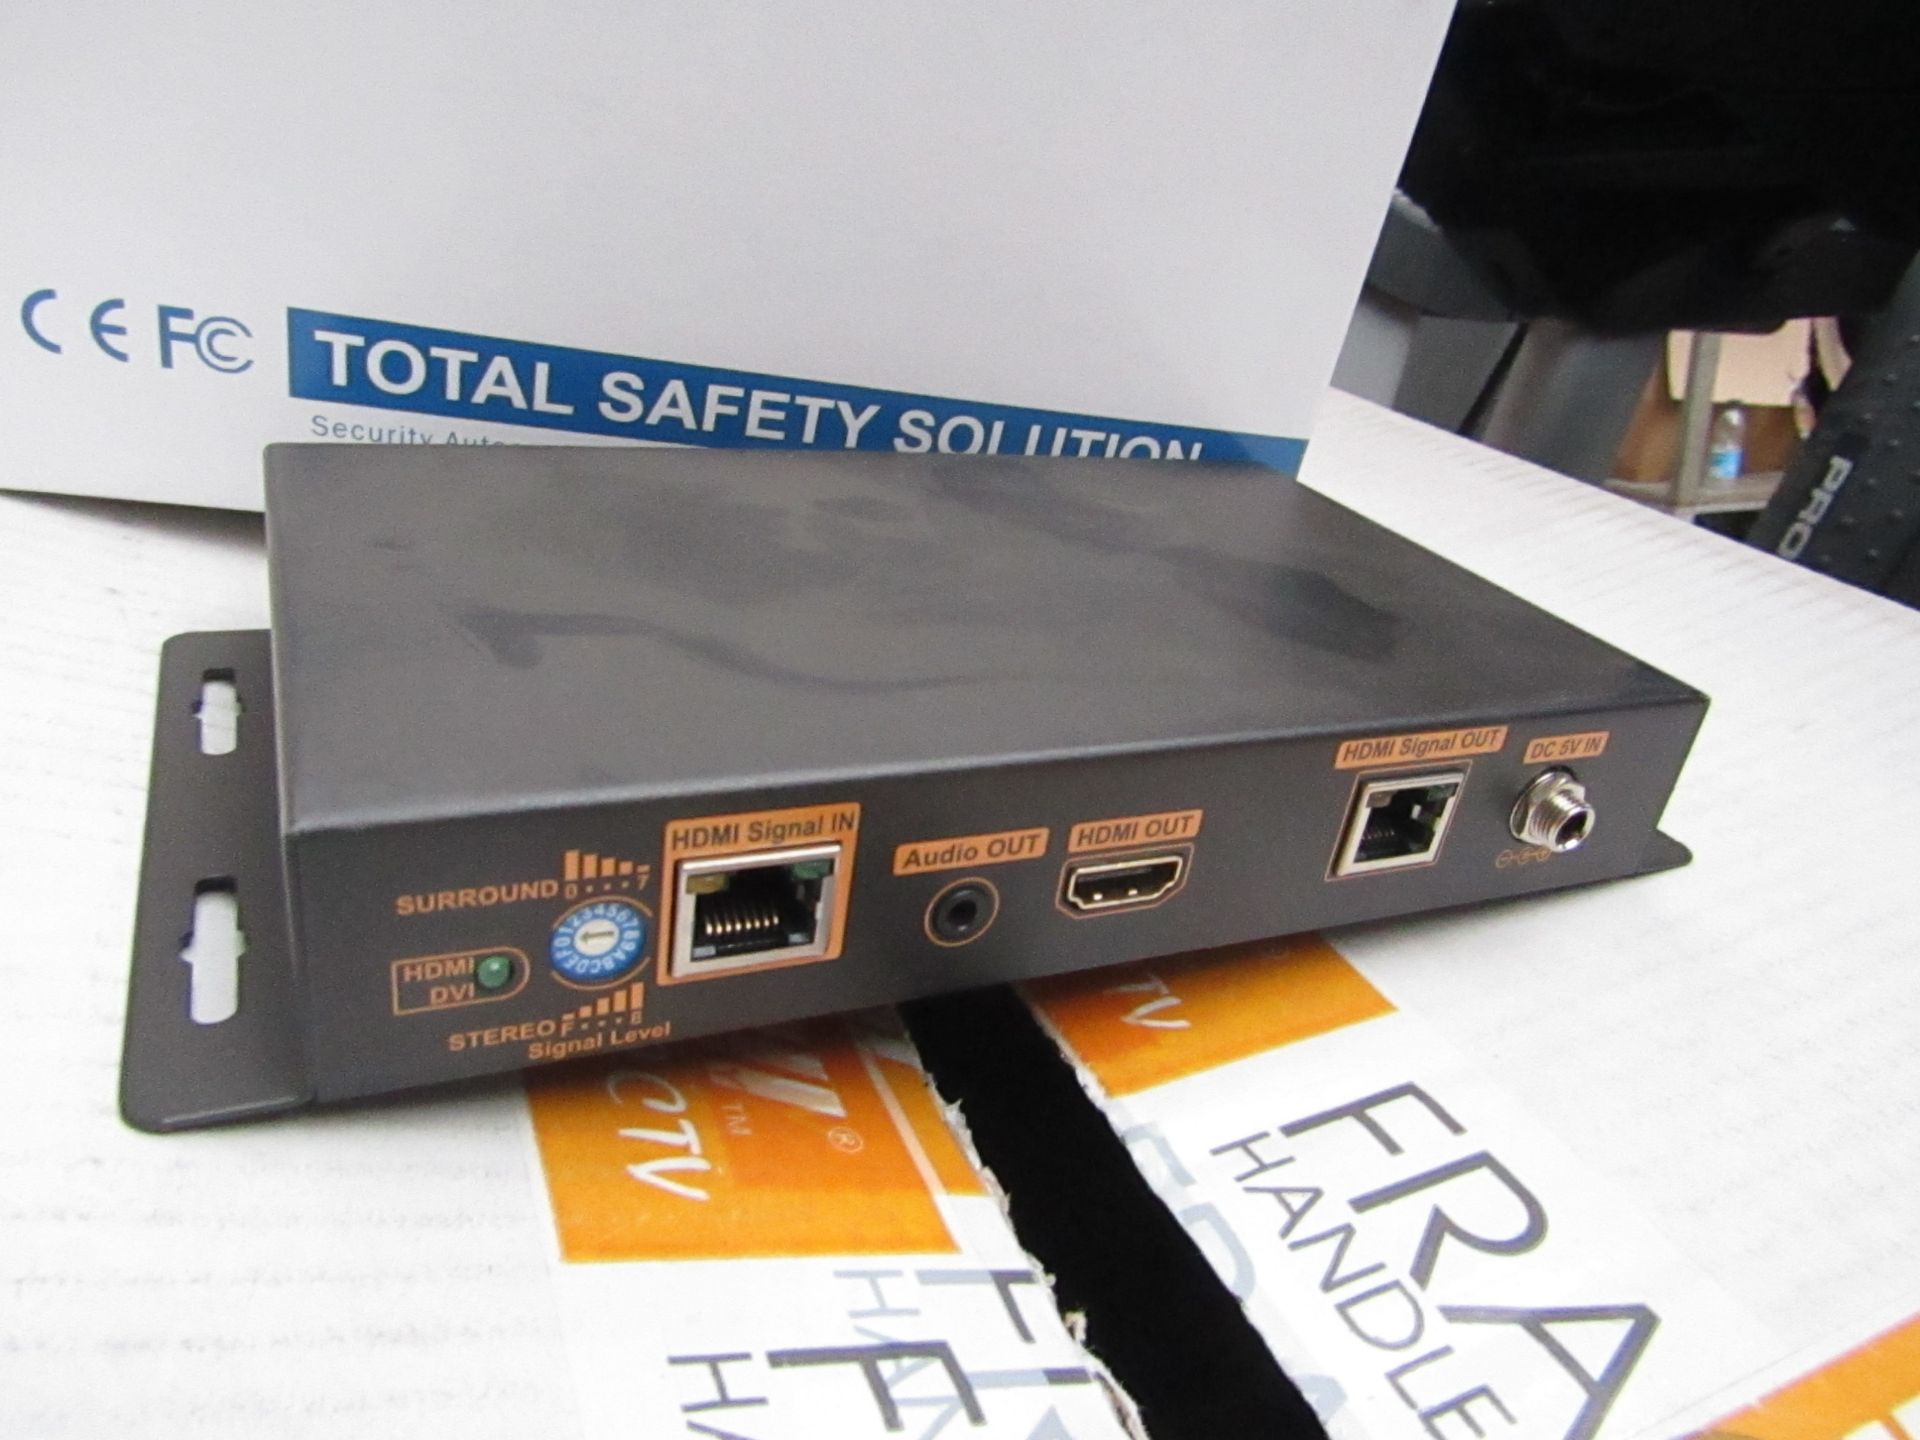 Cop Security 15-HS102TR-U 1 x 2 HDMI splitter / repeater, vendor suggests tested working and we HAVE